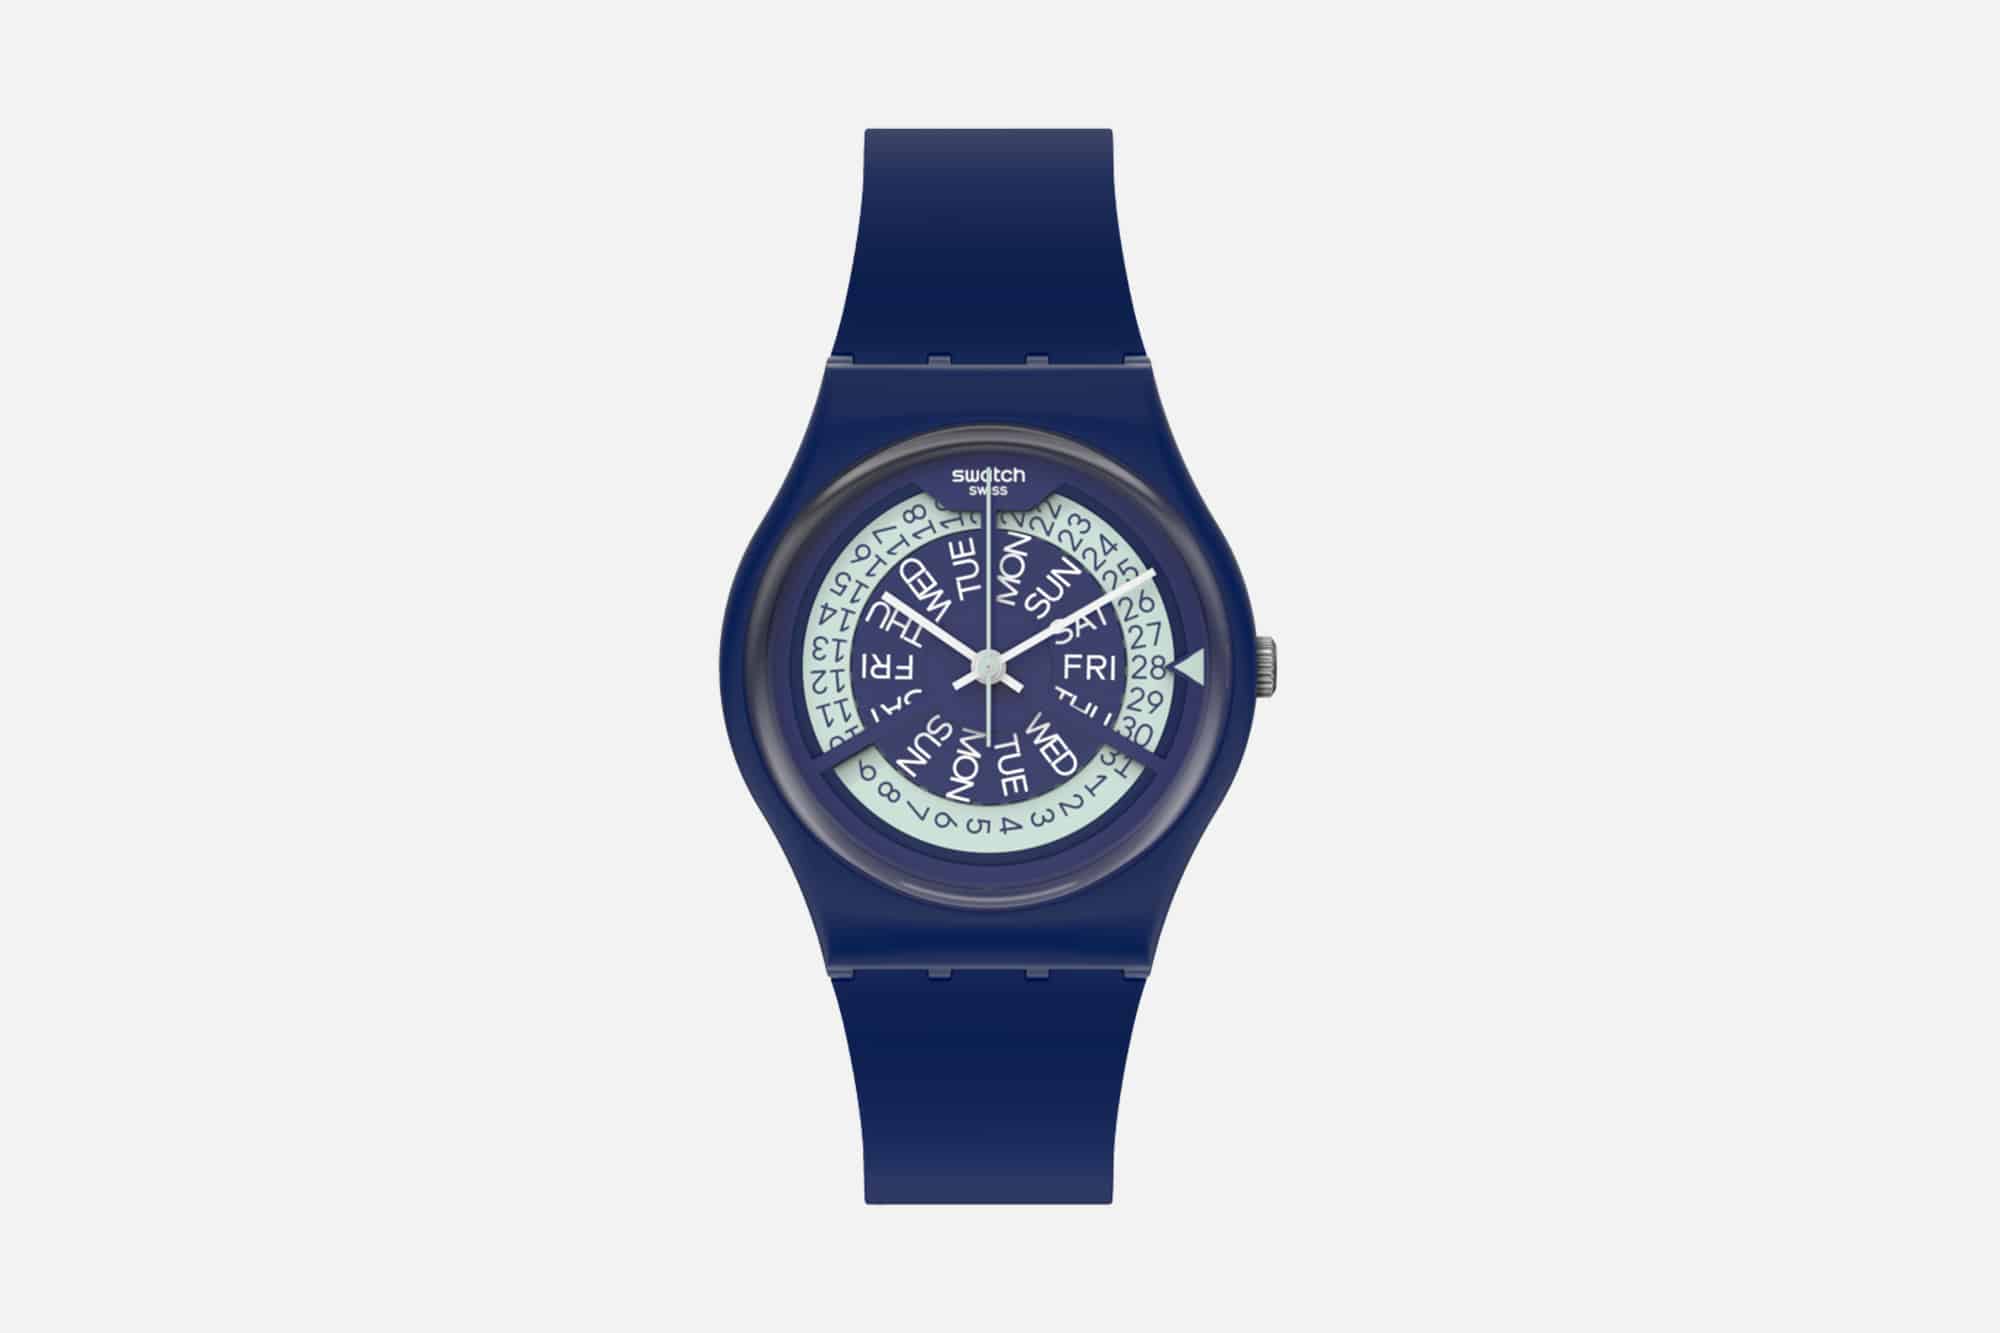 Swatch Introduces Three New Watches With Laser Cut Dials and Fun Color Combinations